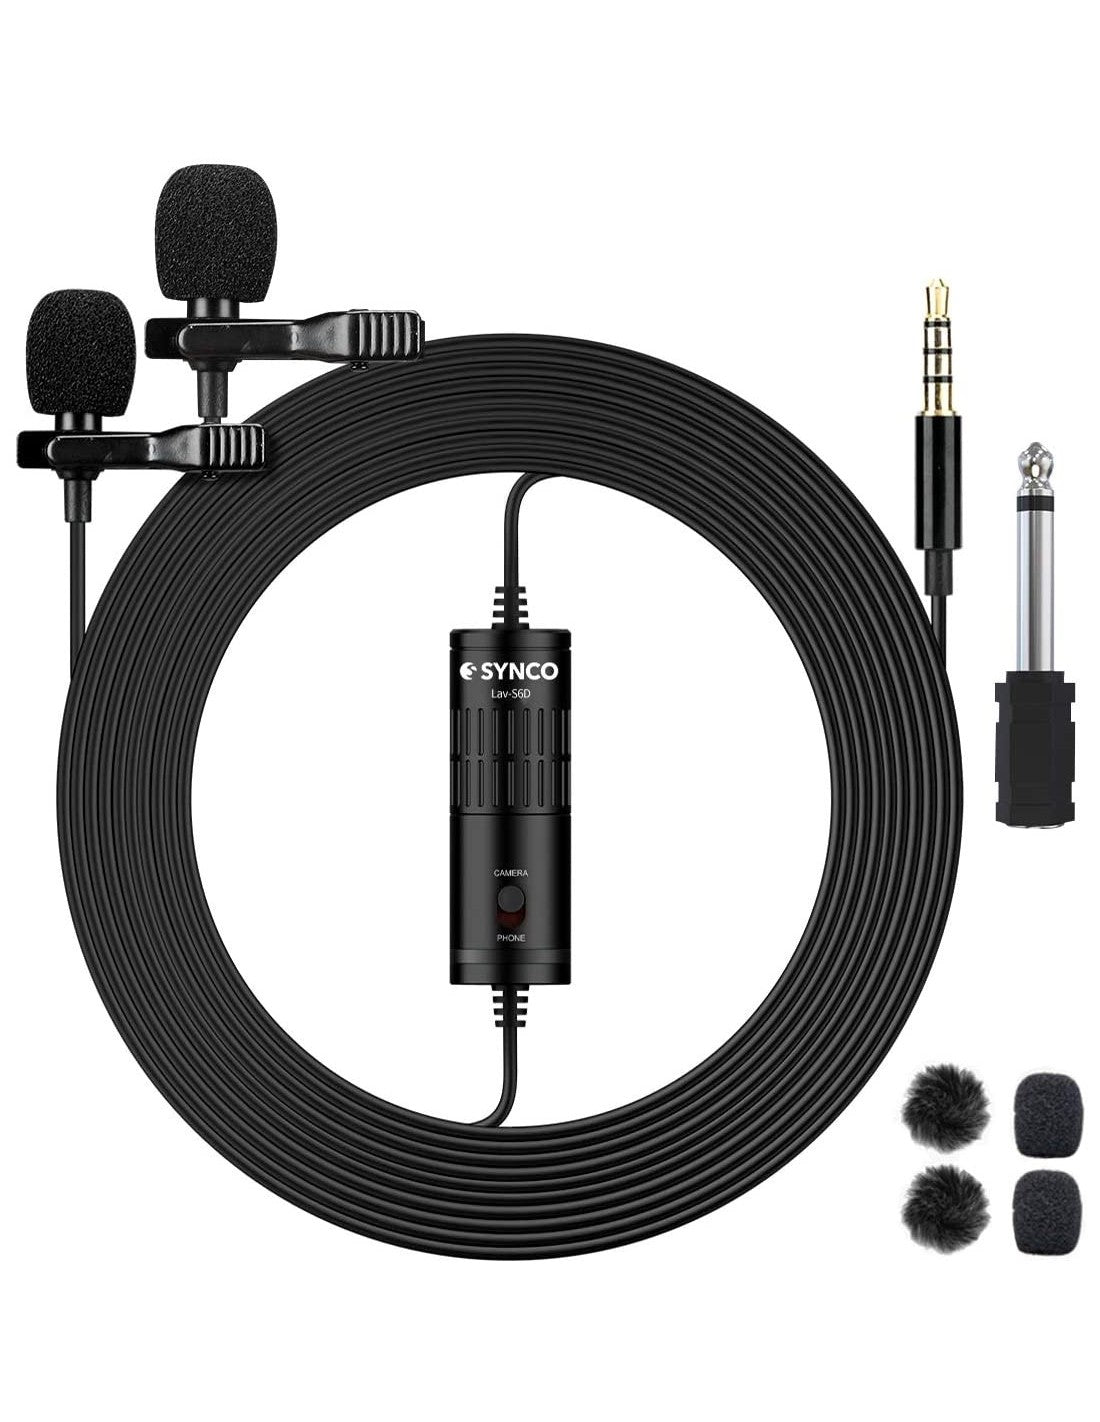 Synco Lav-S6D Dual-Omnidirectional Lavalier Microphone